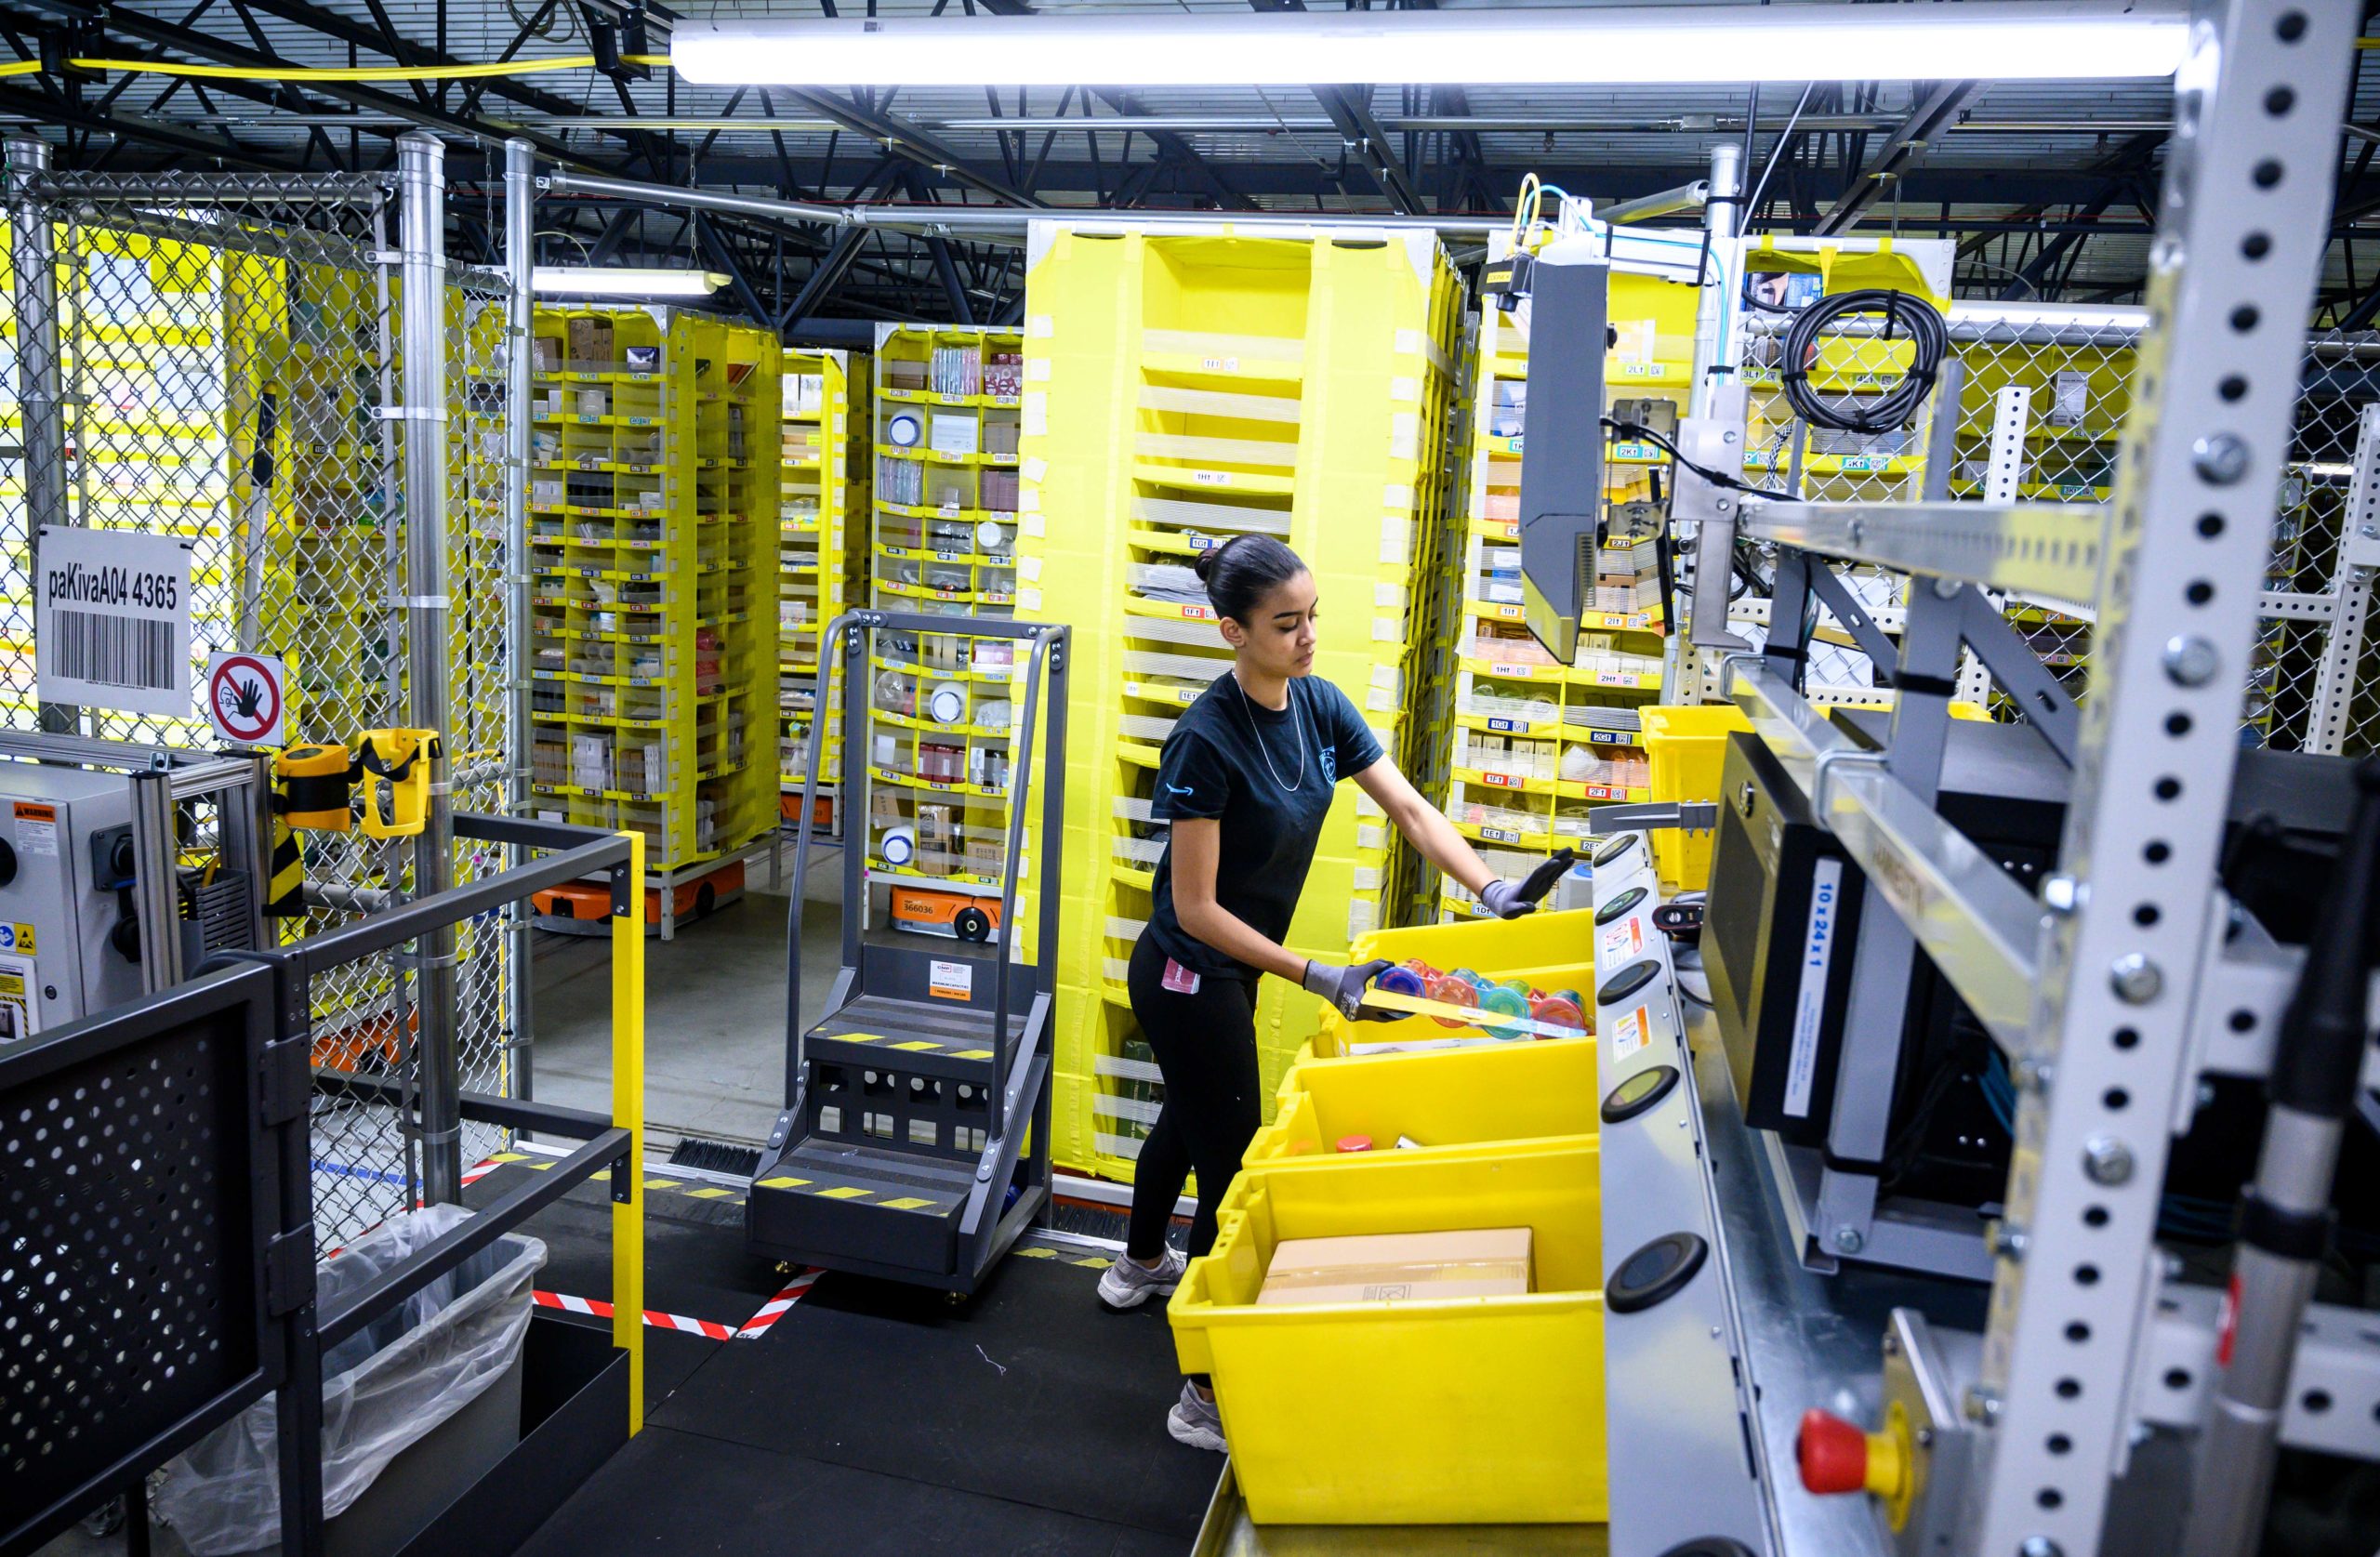 A woman works at a distribution station at the 855,000-square-foot Amazon fulfillment center in Staten Island, New York in 2019. (Johannes Eisele/AFP via Getty Images)